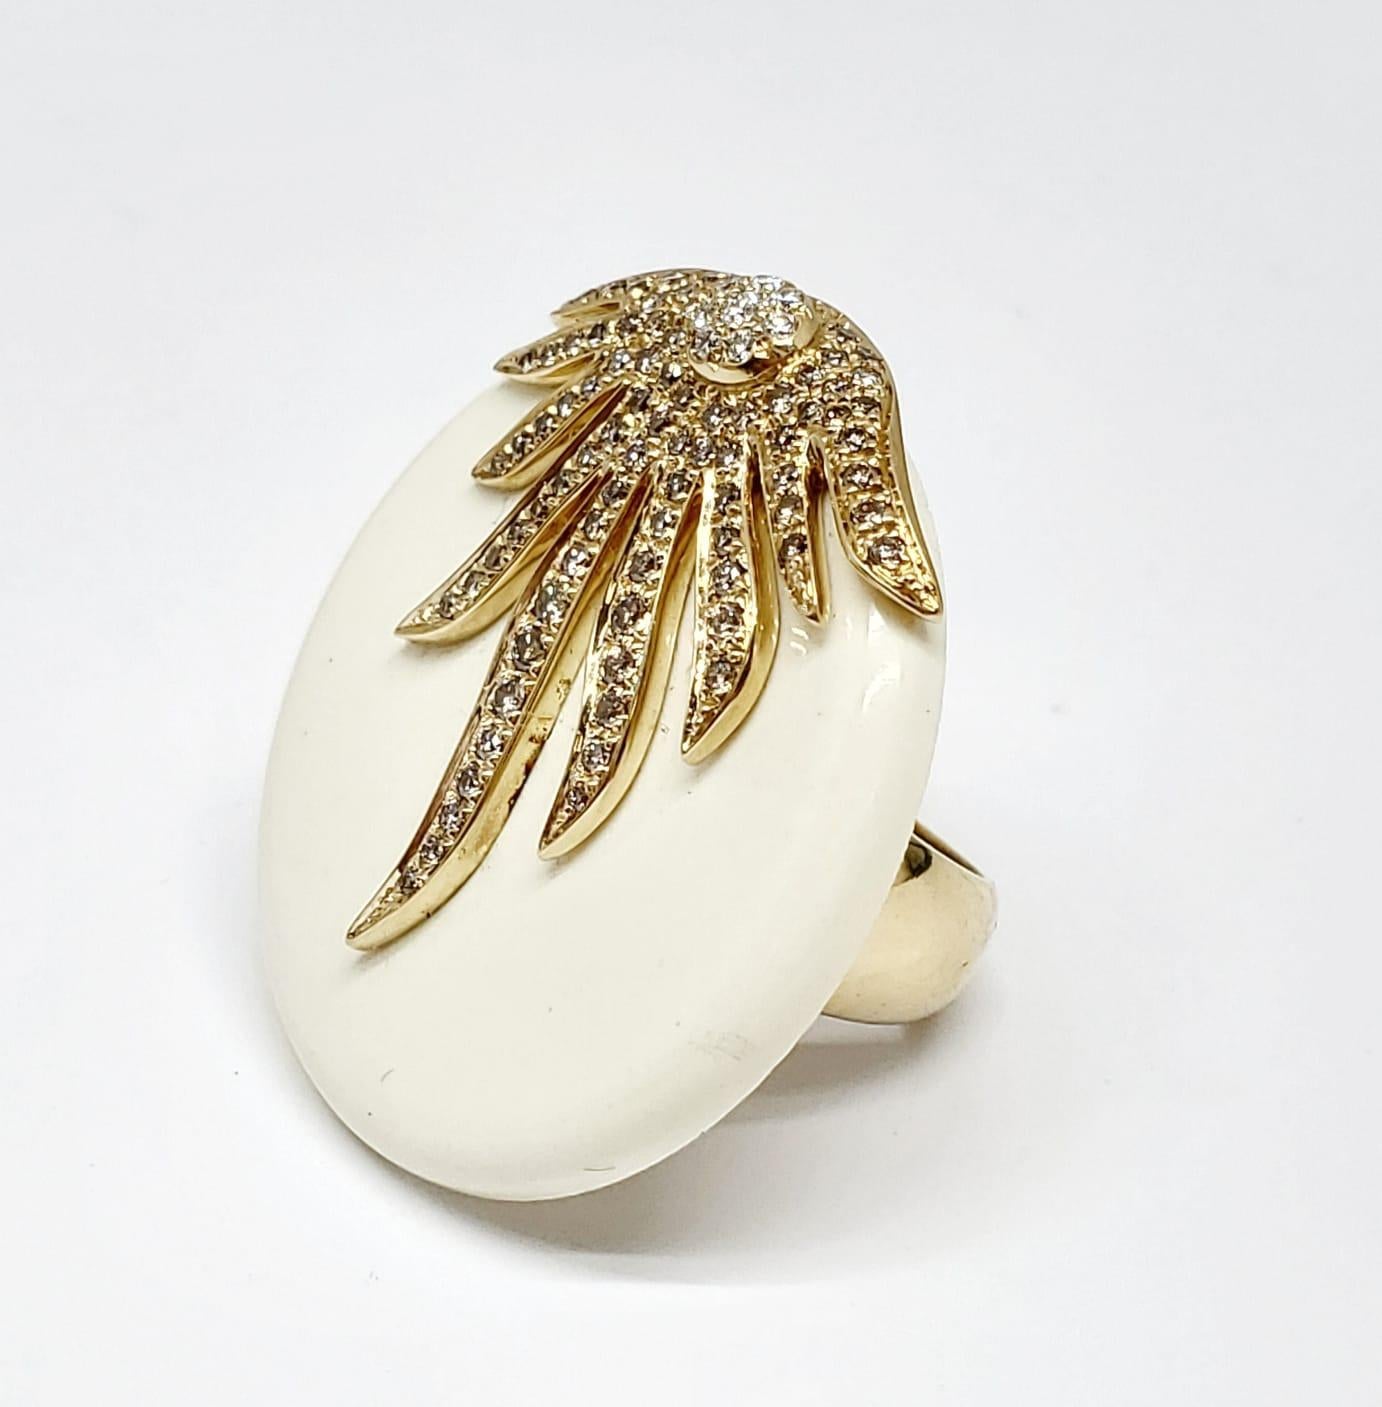 Brilliant Cut Andreoli Ivory Agate White and Cognac Diamond Cocktail Ring 18 Karat Yellow Gold For Sale